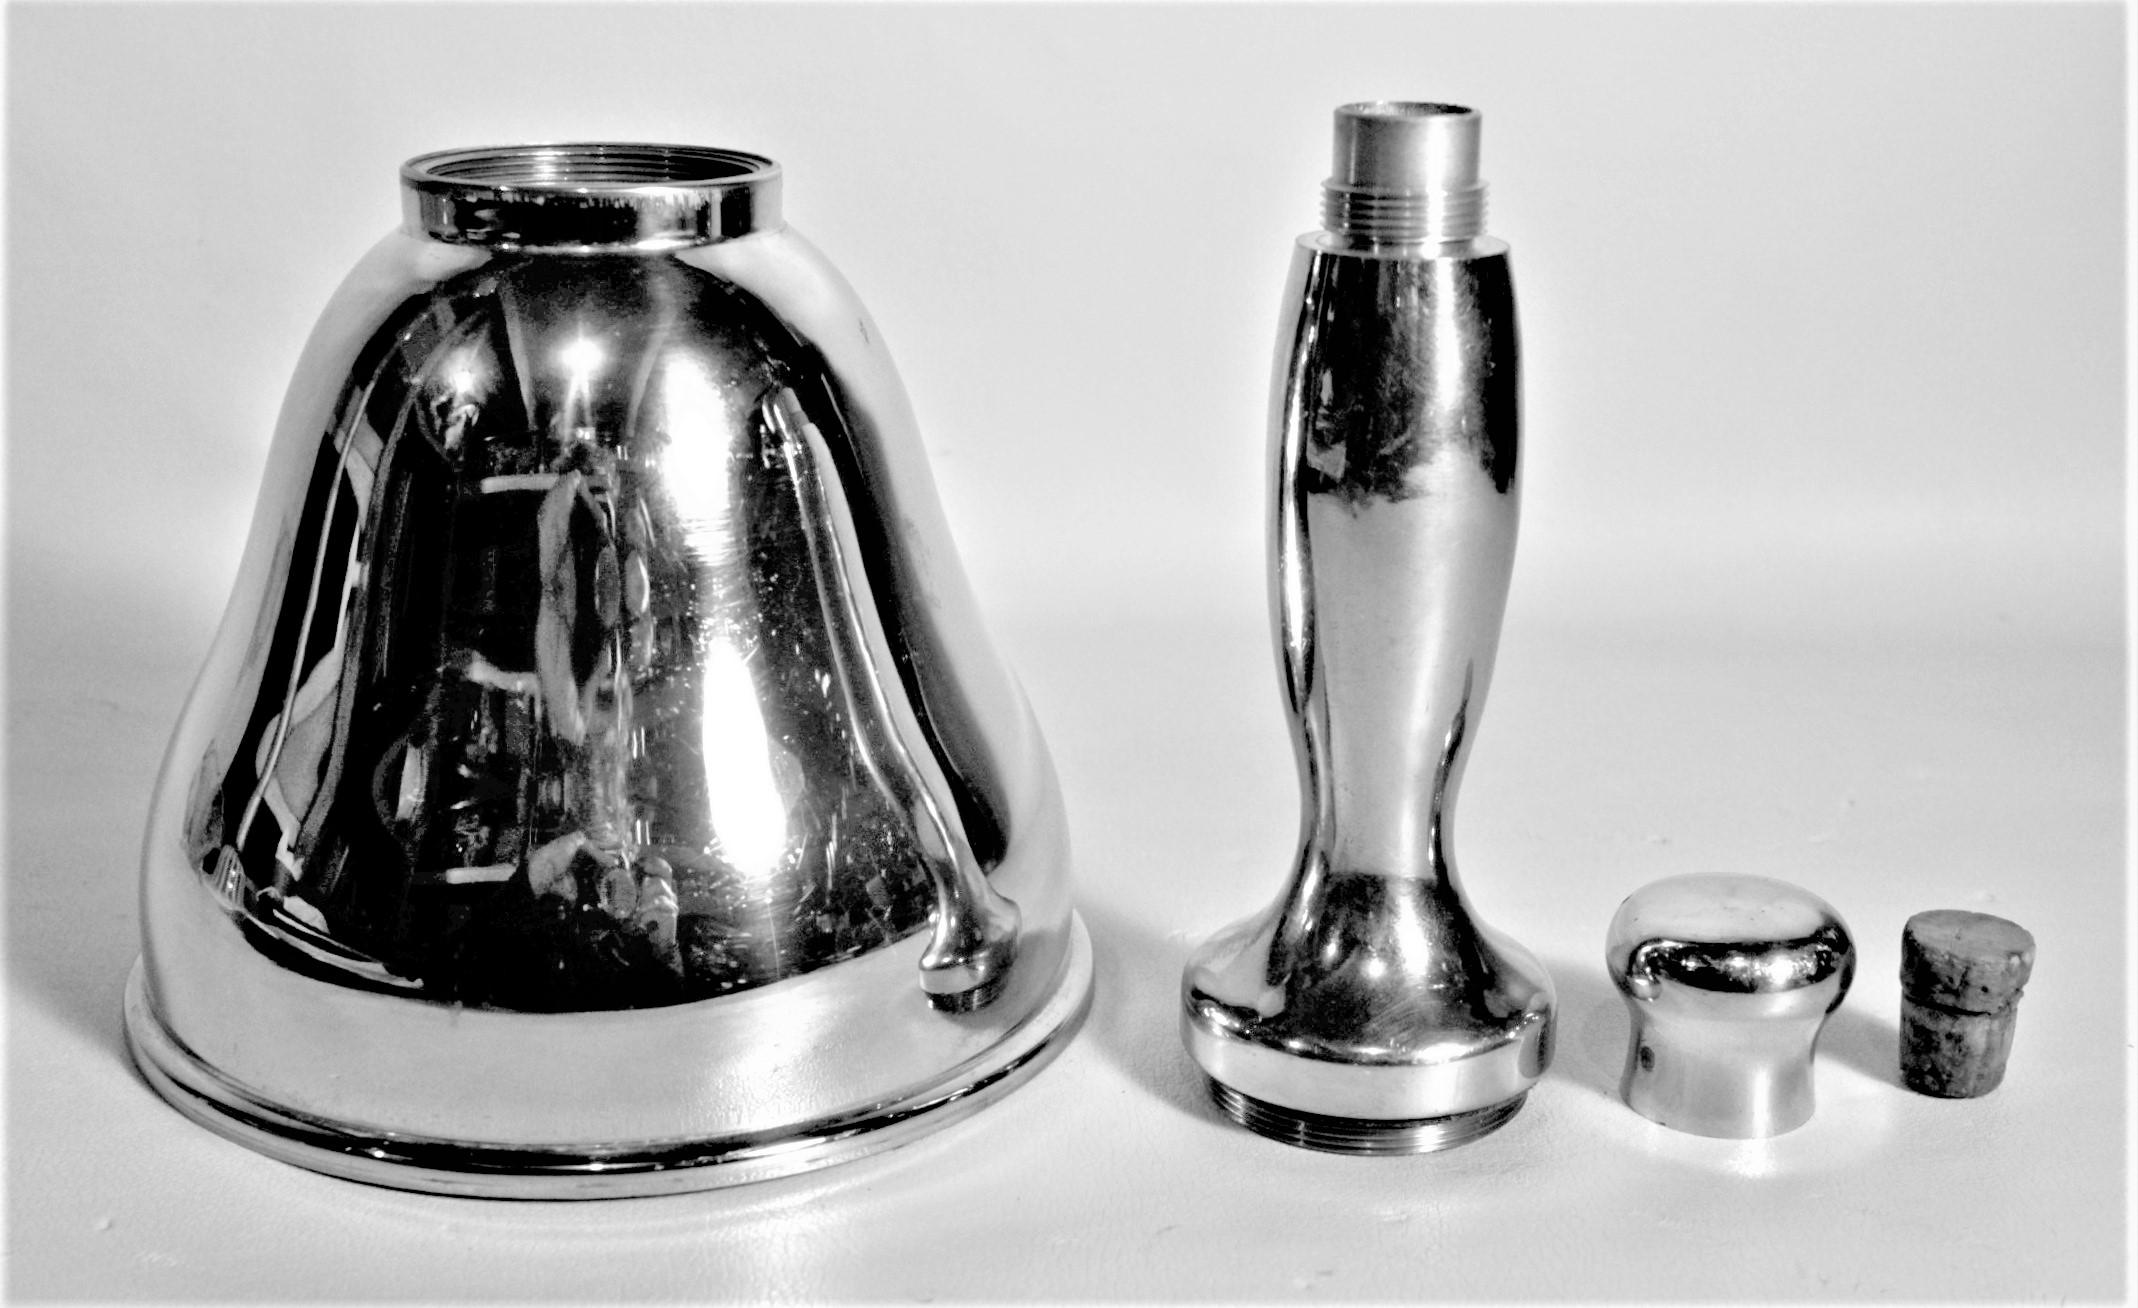 English Antique Silver Plated Hand Held School Bell Shaped Cocktail or Bar Shaker For Sale